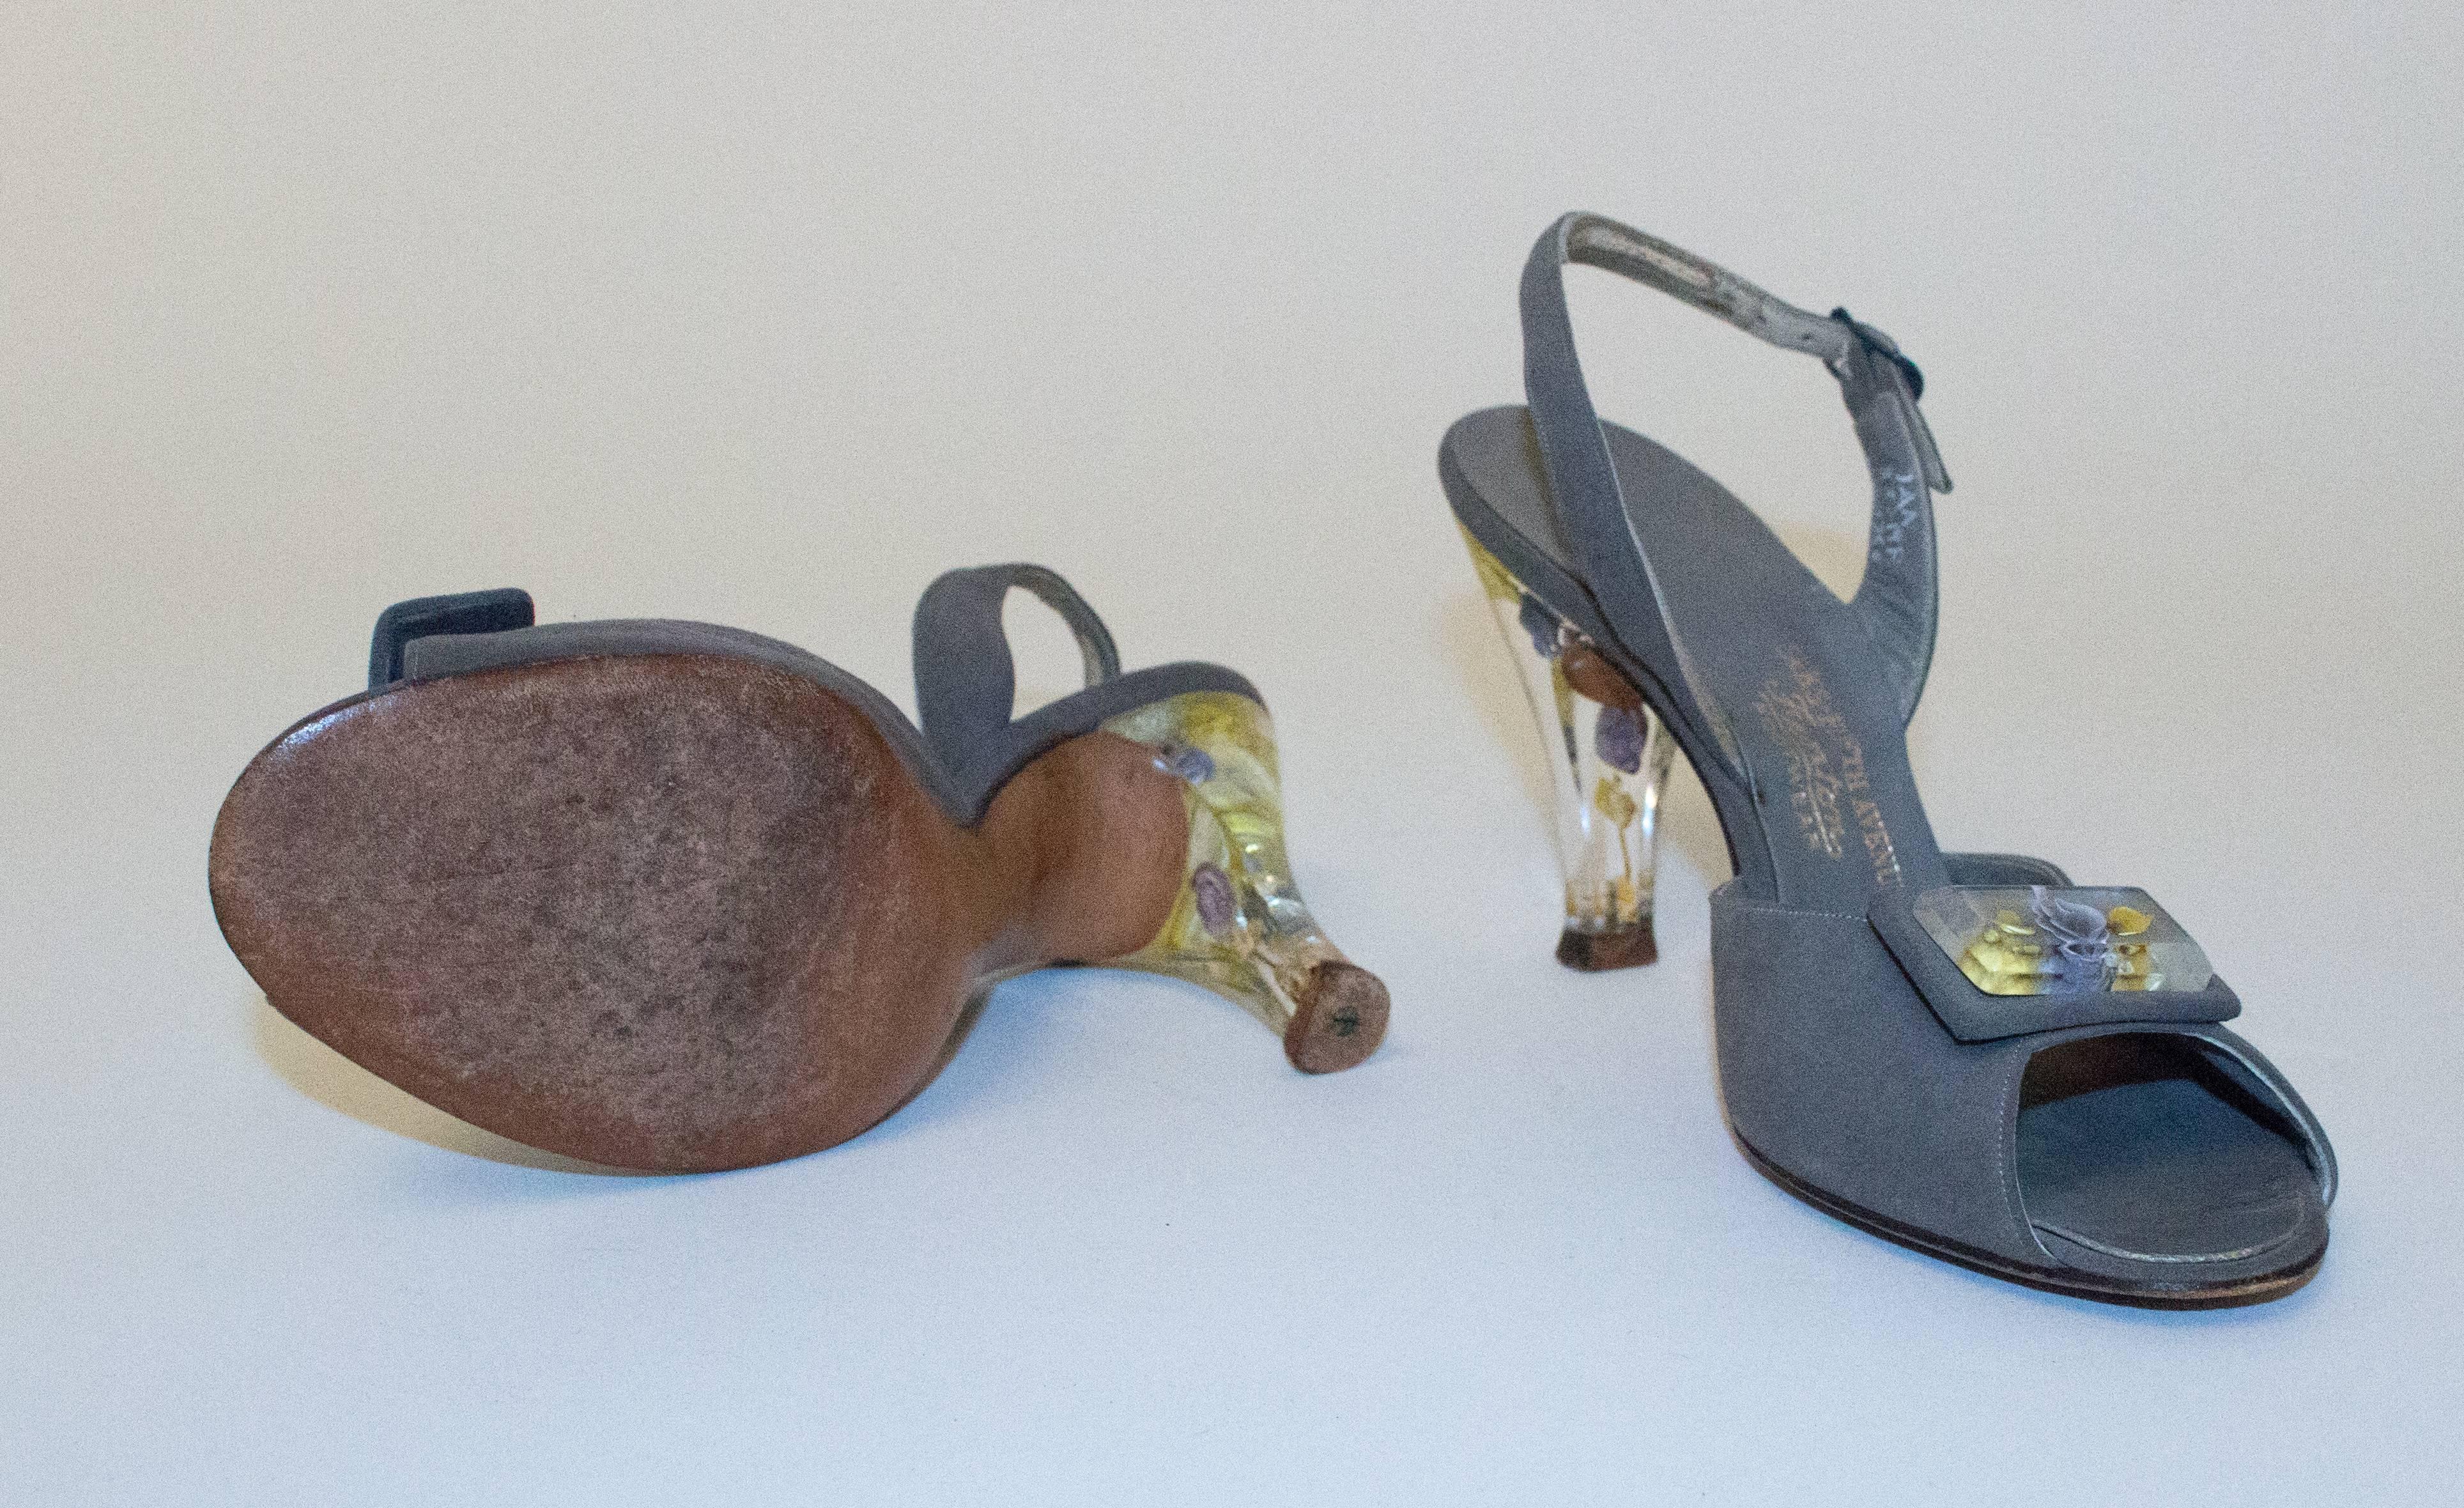 50s Grey Suede & Lucite Heels with Flower Details. Leather soles. 

Measurements:
Insole: 9 1/2